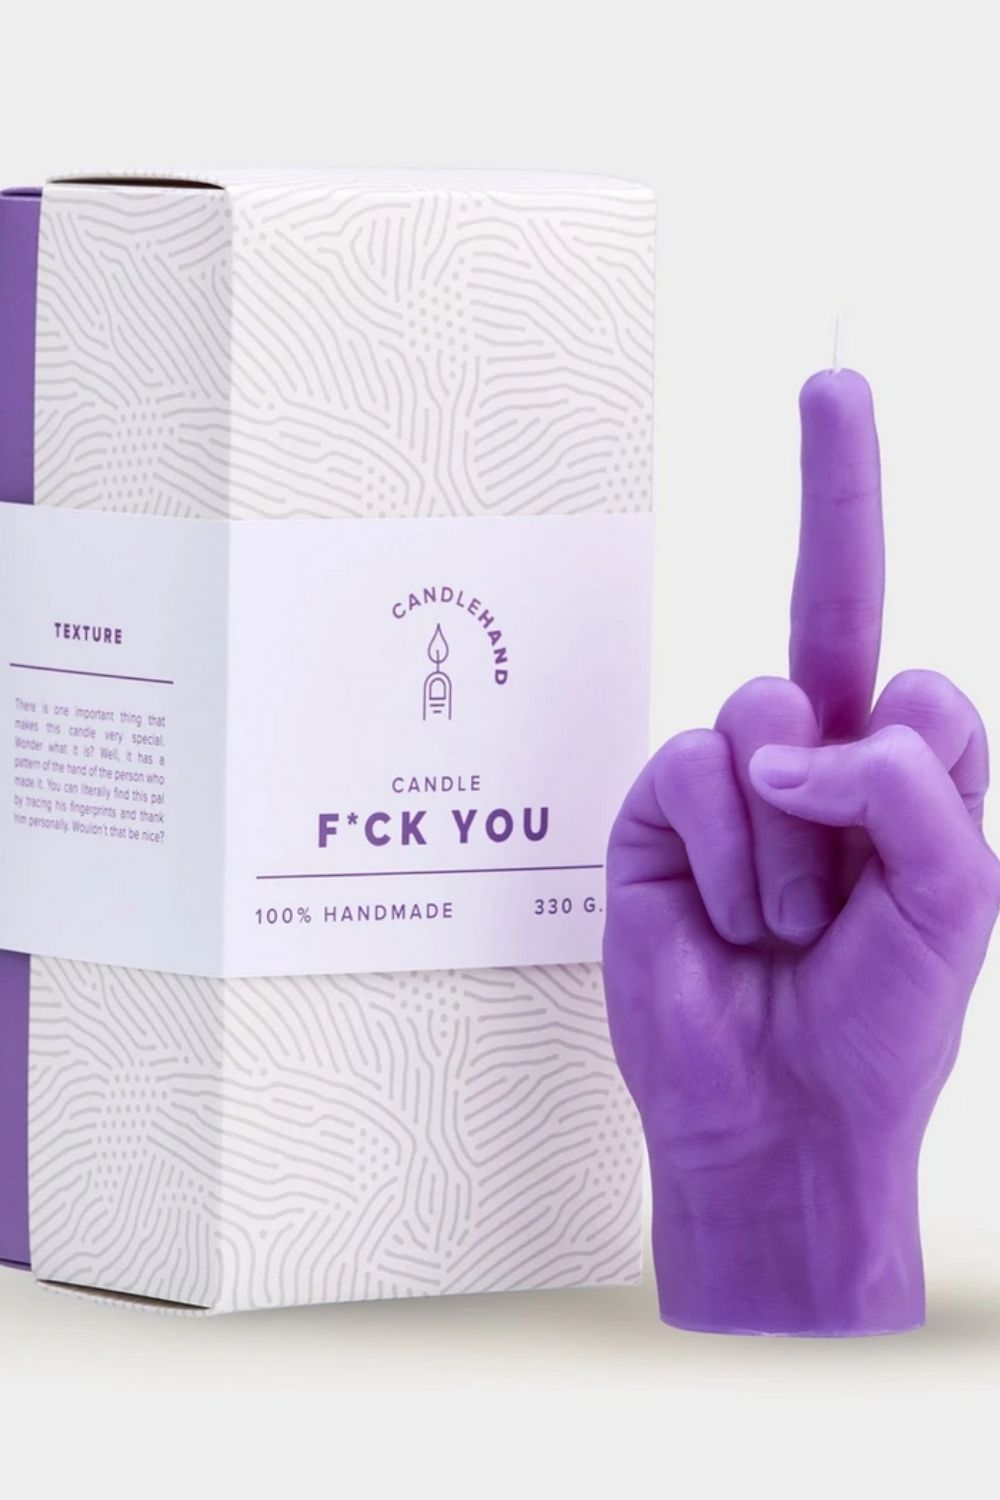 "F*CK YOU" HAND GESTURE CANDLE - PURPLE